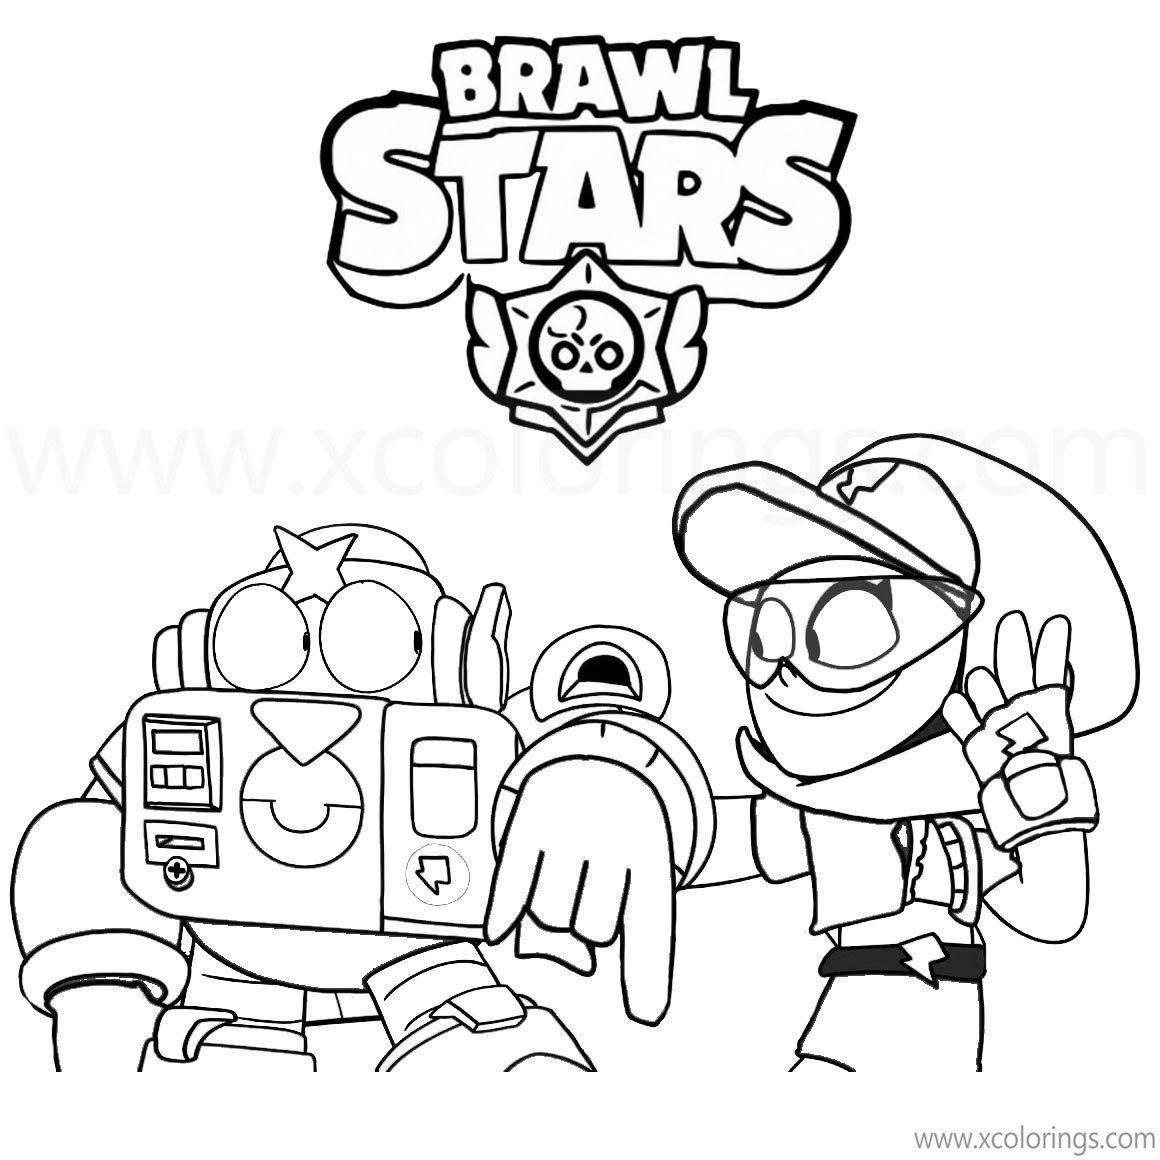 Free Max Brawl Stars Coloring Pages with Surge printable